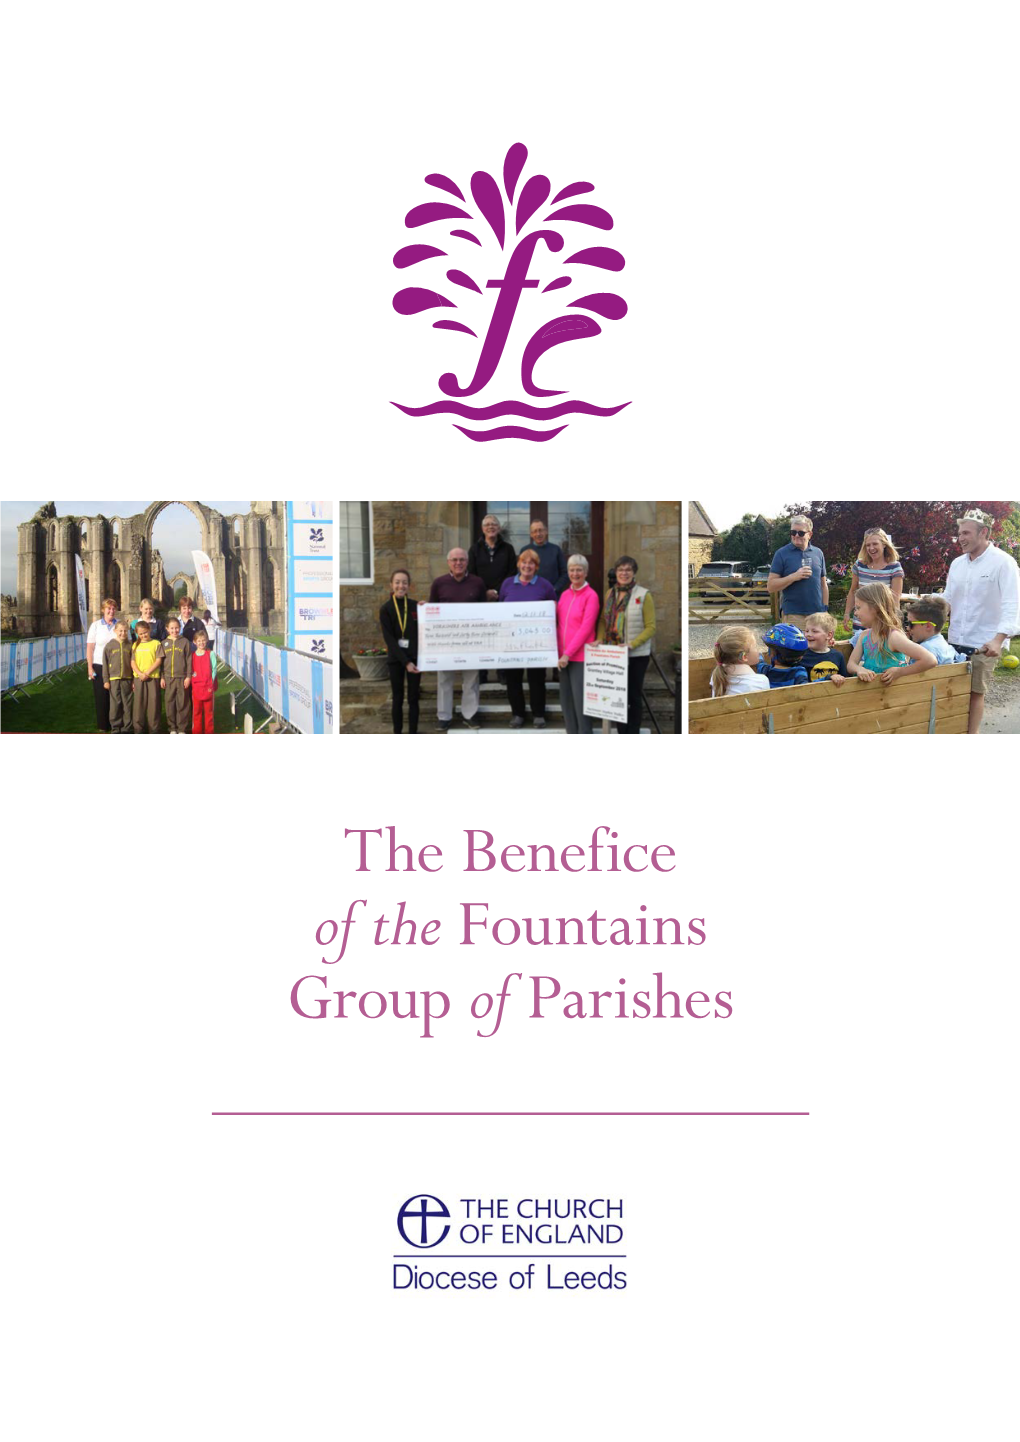 The Benefice of the Fountains Group of Parishes